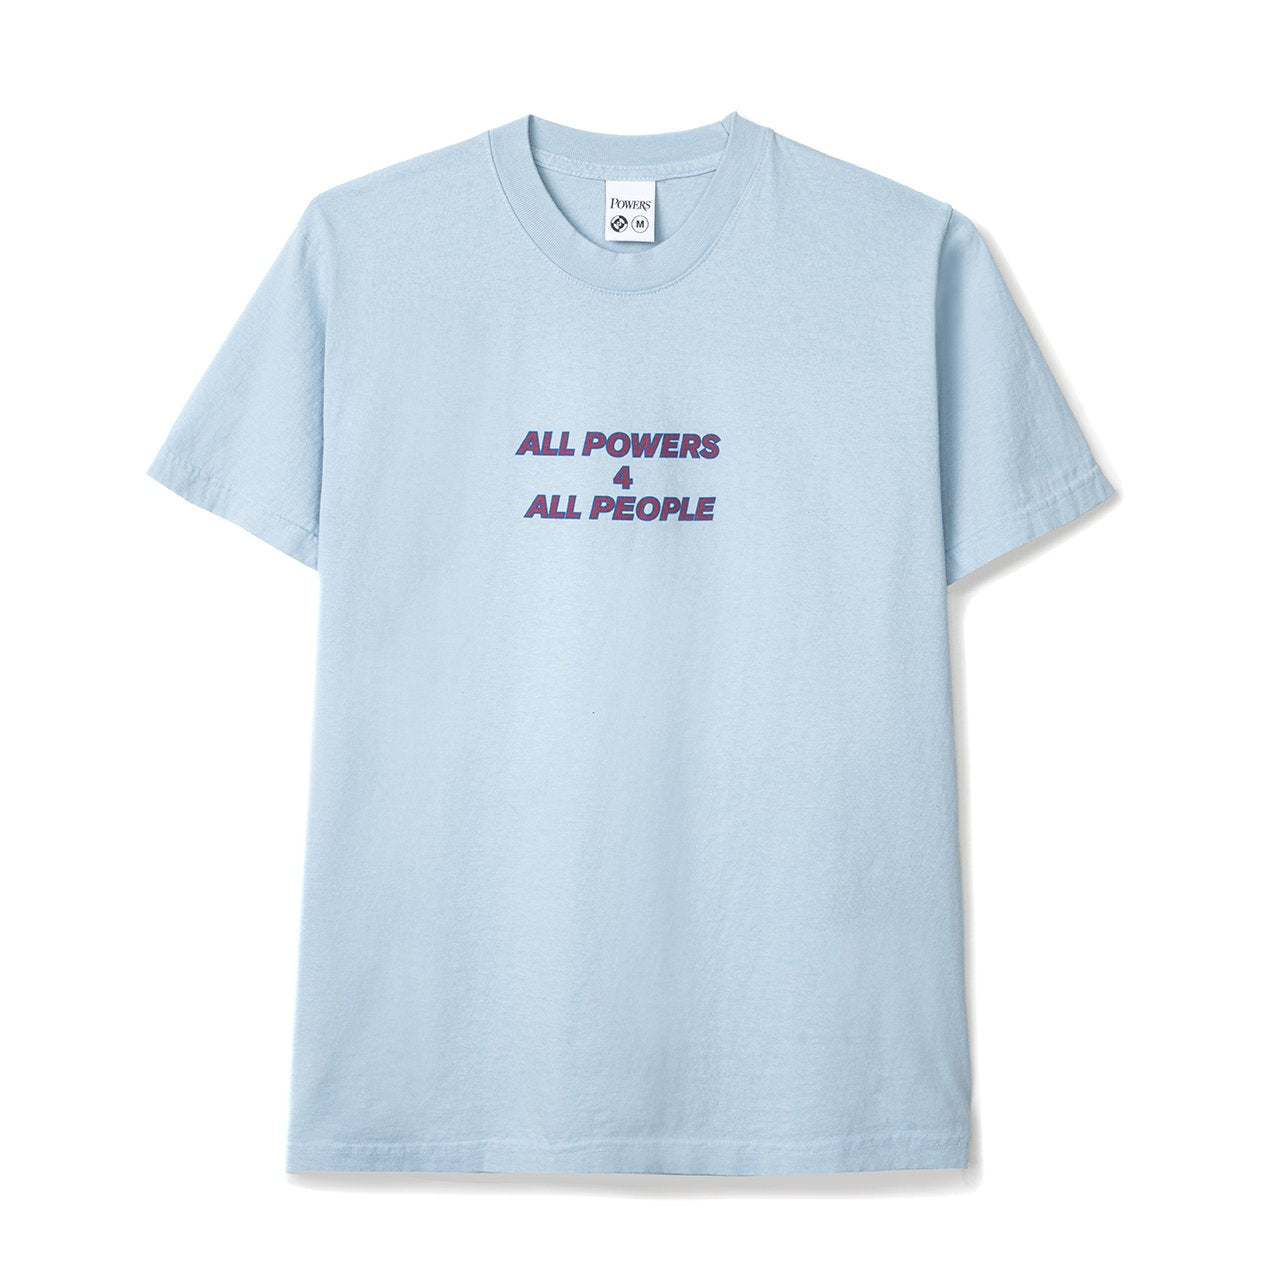 ALL POWERS 4 ALL PEOPLE SS TEE - BLUE